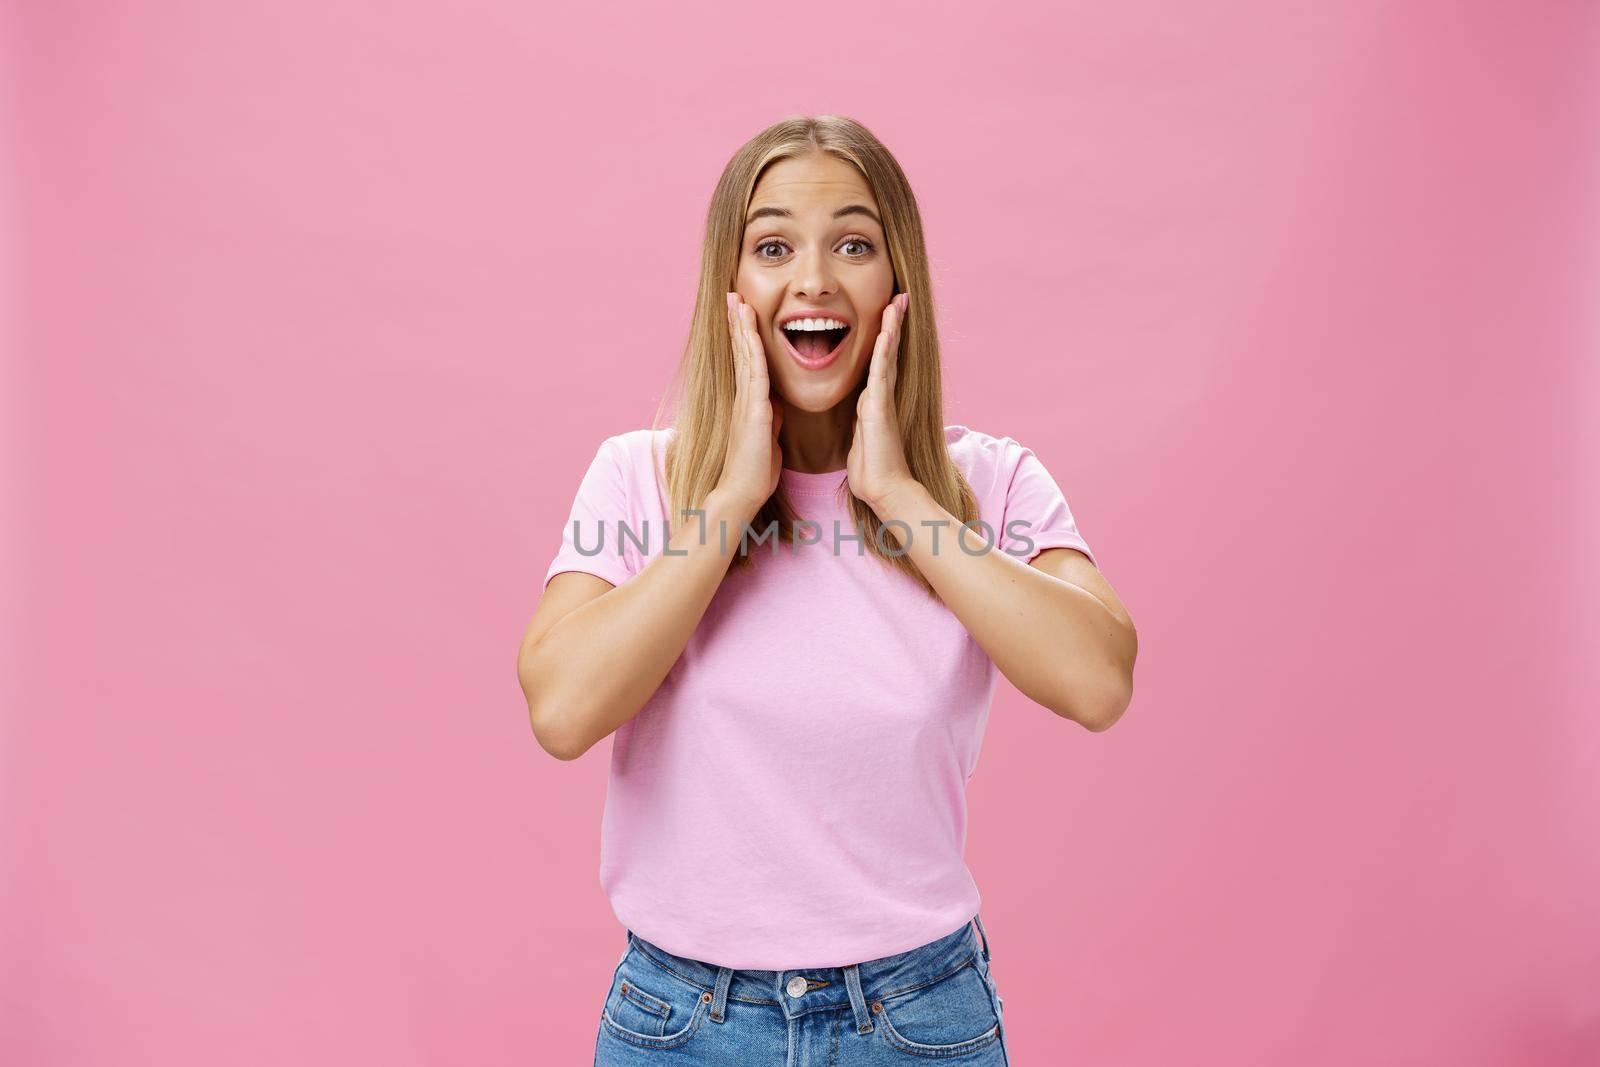 Delighted and amazed happy girlfriend in t-shirt and jeans smiling broadly with opened mouth amused touching cheeks surprised and satisfied reacting to positive surprise over pink background. Copy space